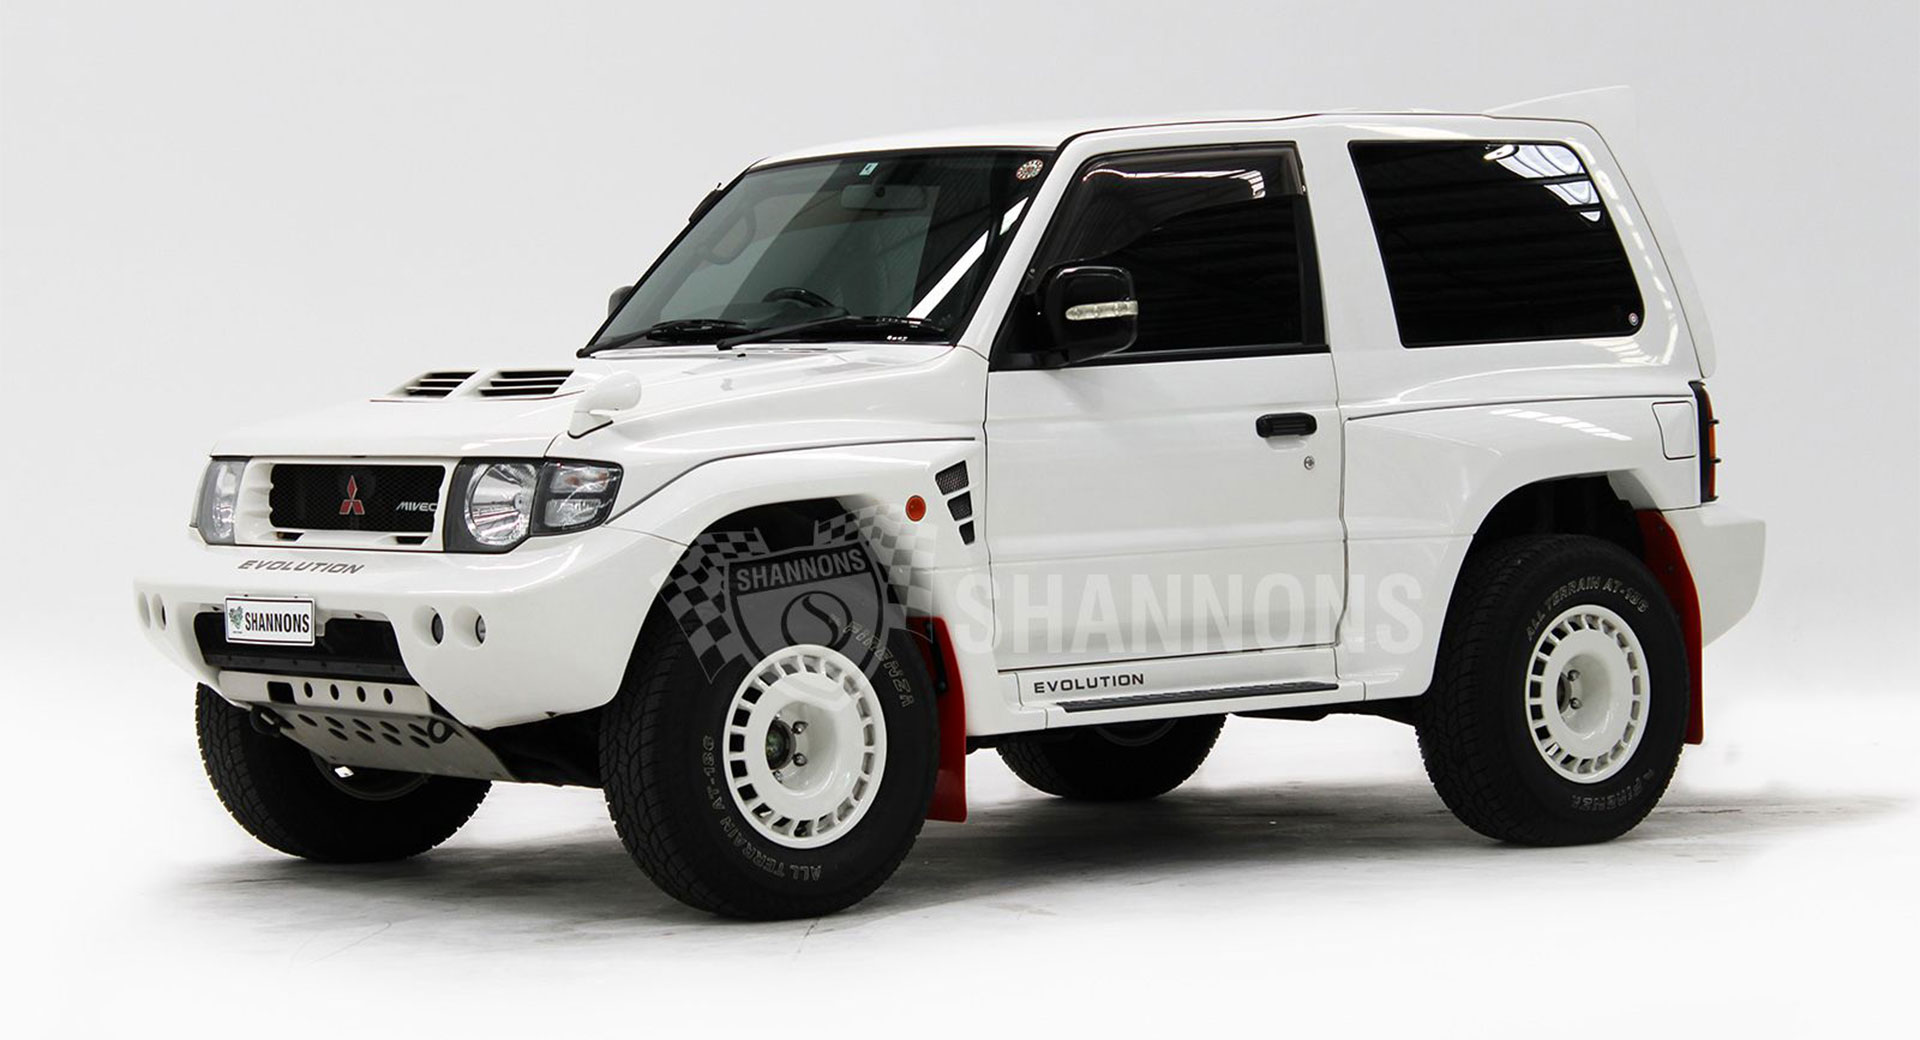 Do Off-Roaders Any Than This Mitsubishi Pajero Evolution? | Carscoops